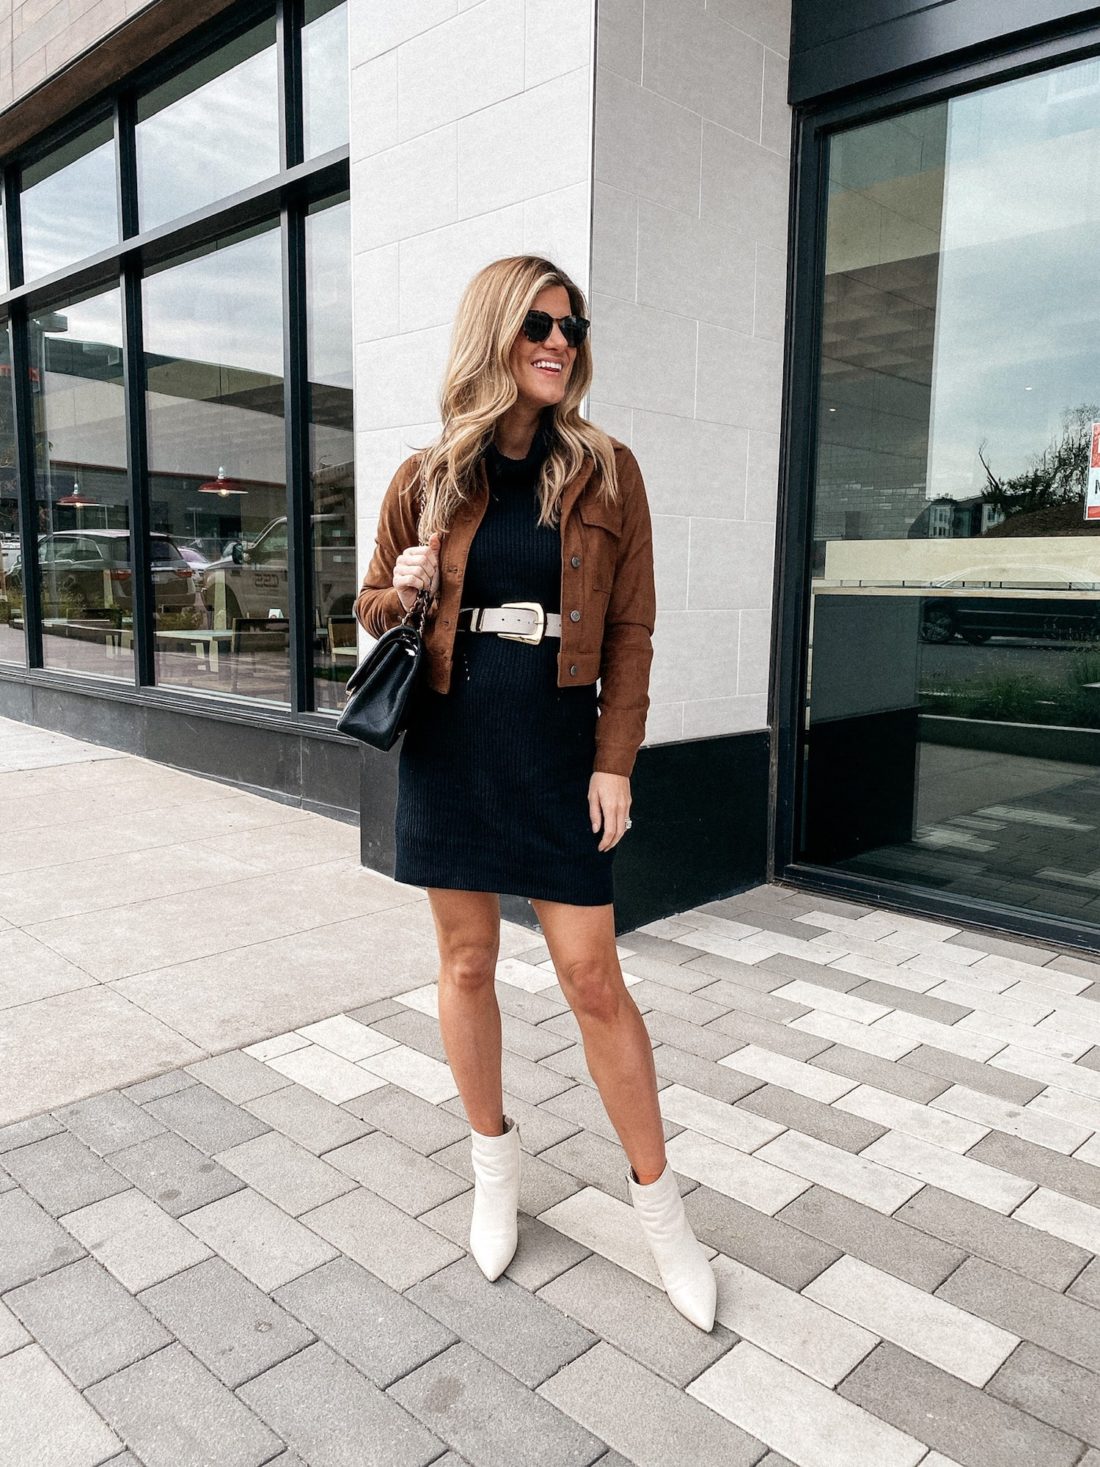 Brighton Butler wearing a black sweater dress, white belt, brown jacket and white booties